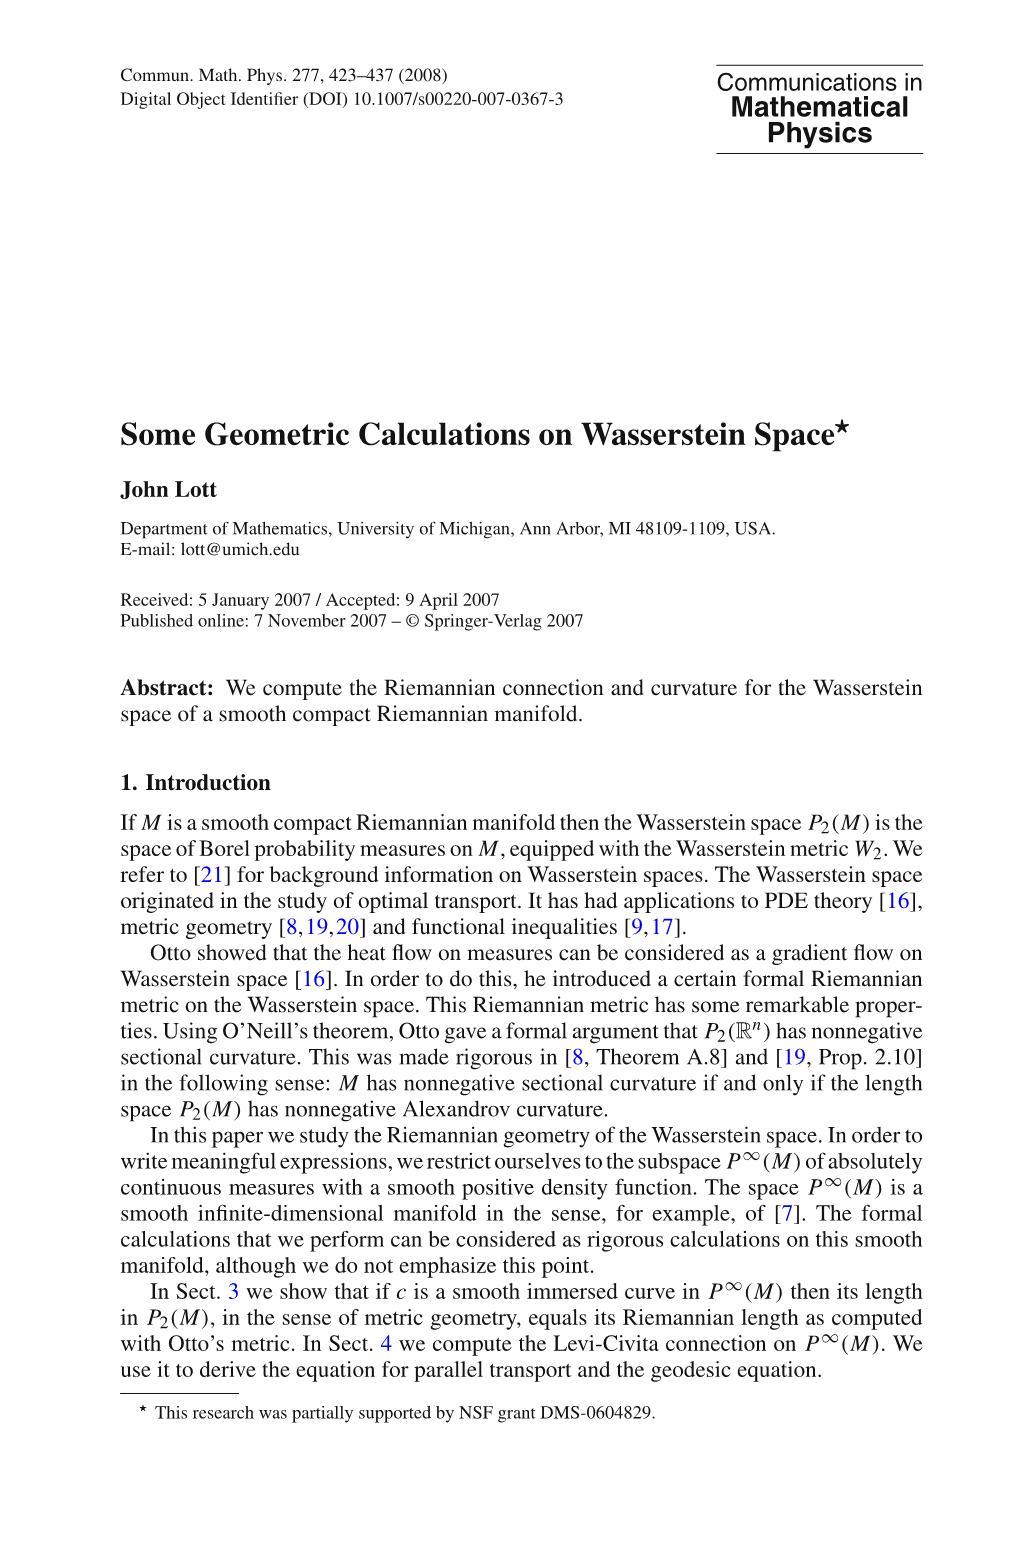 Some Geometric Calculations on Wasserstein Space